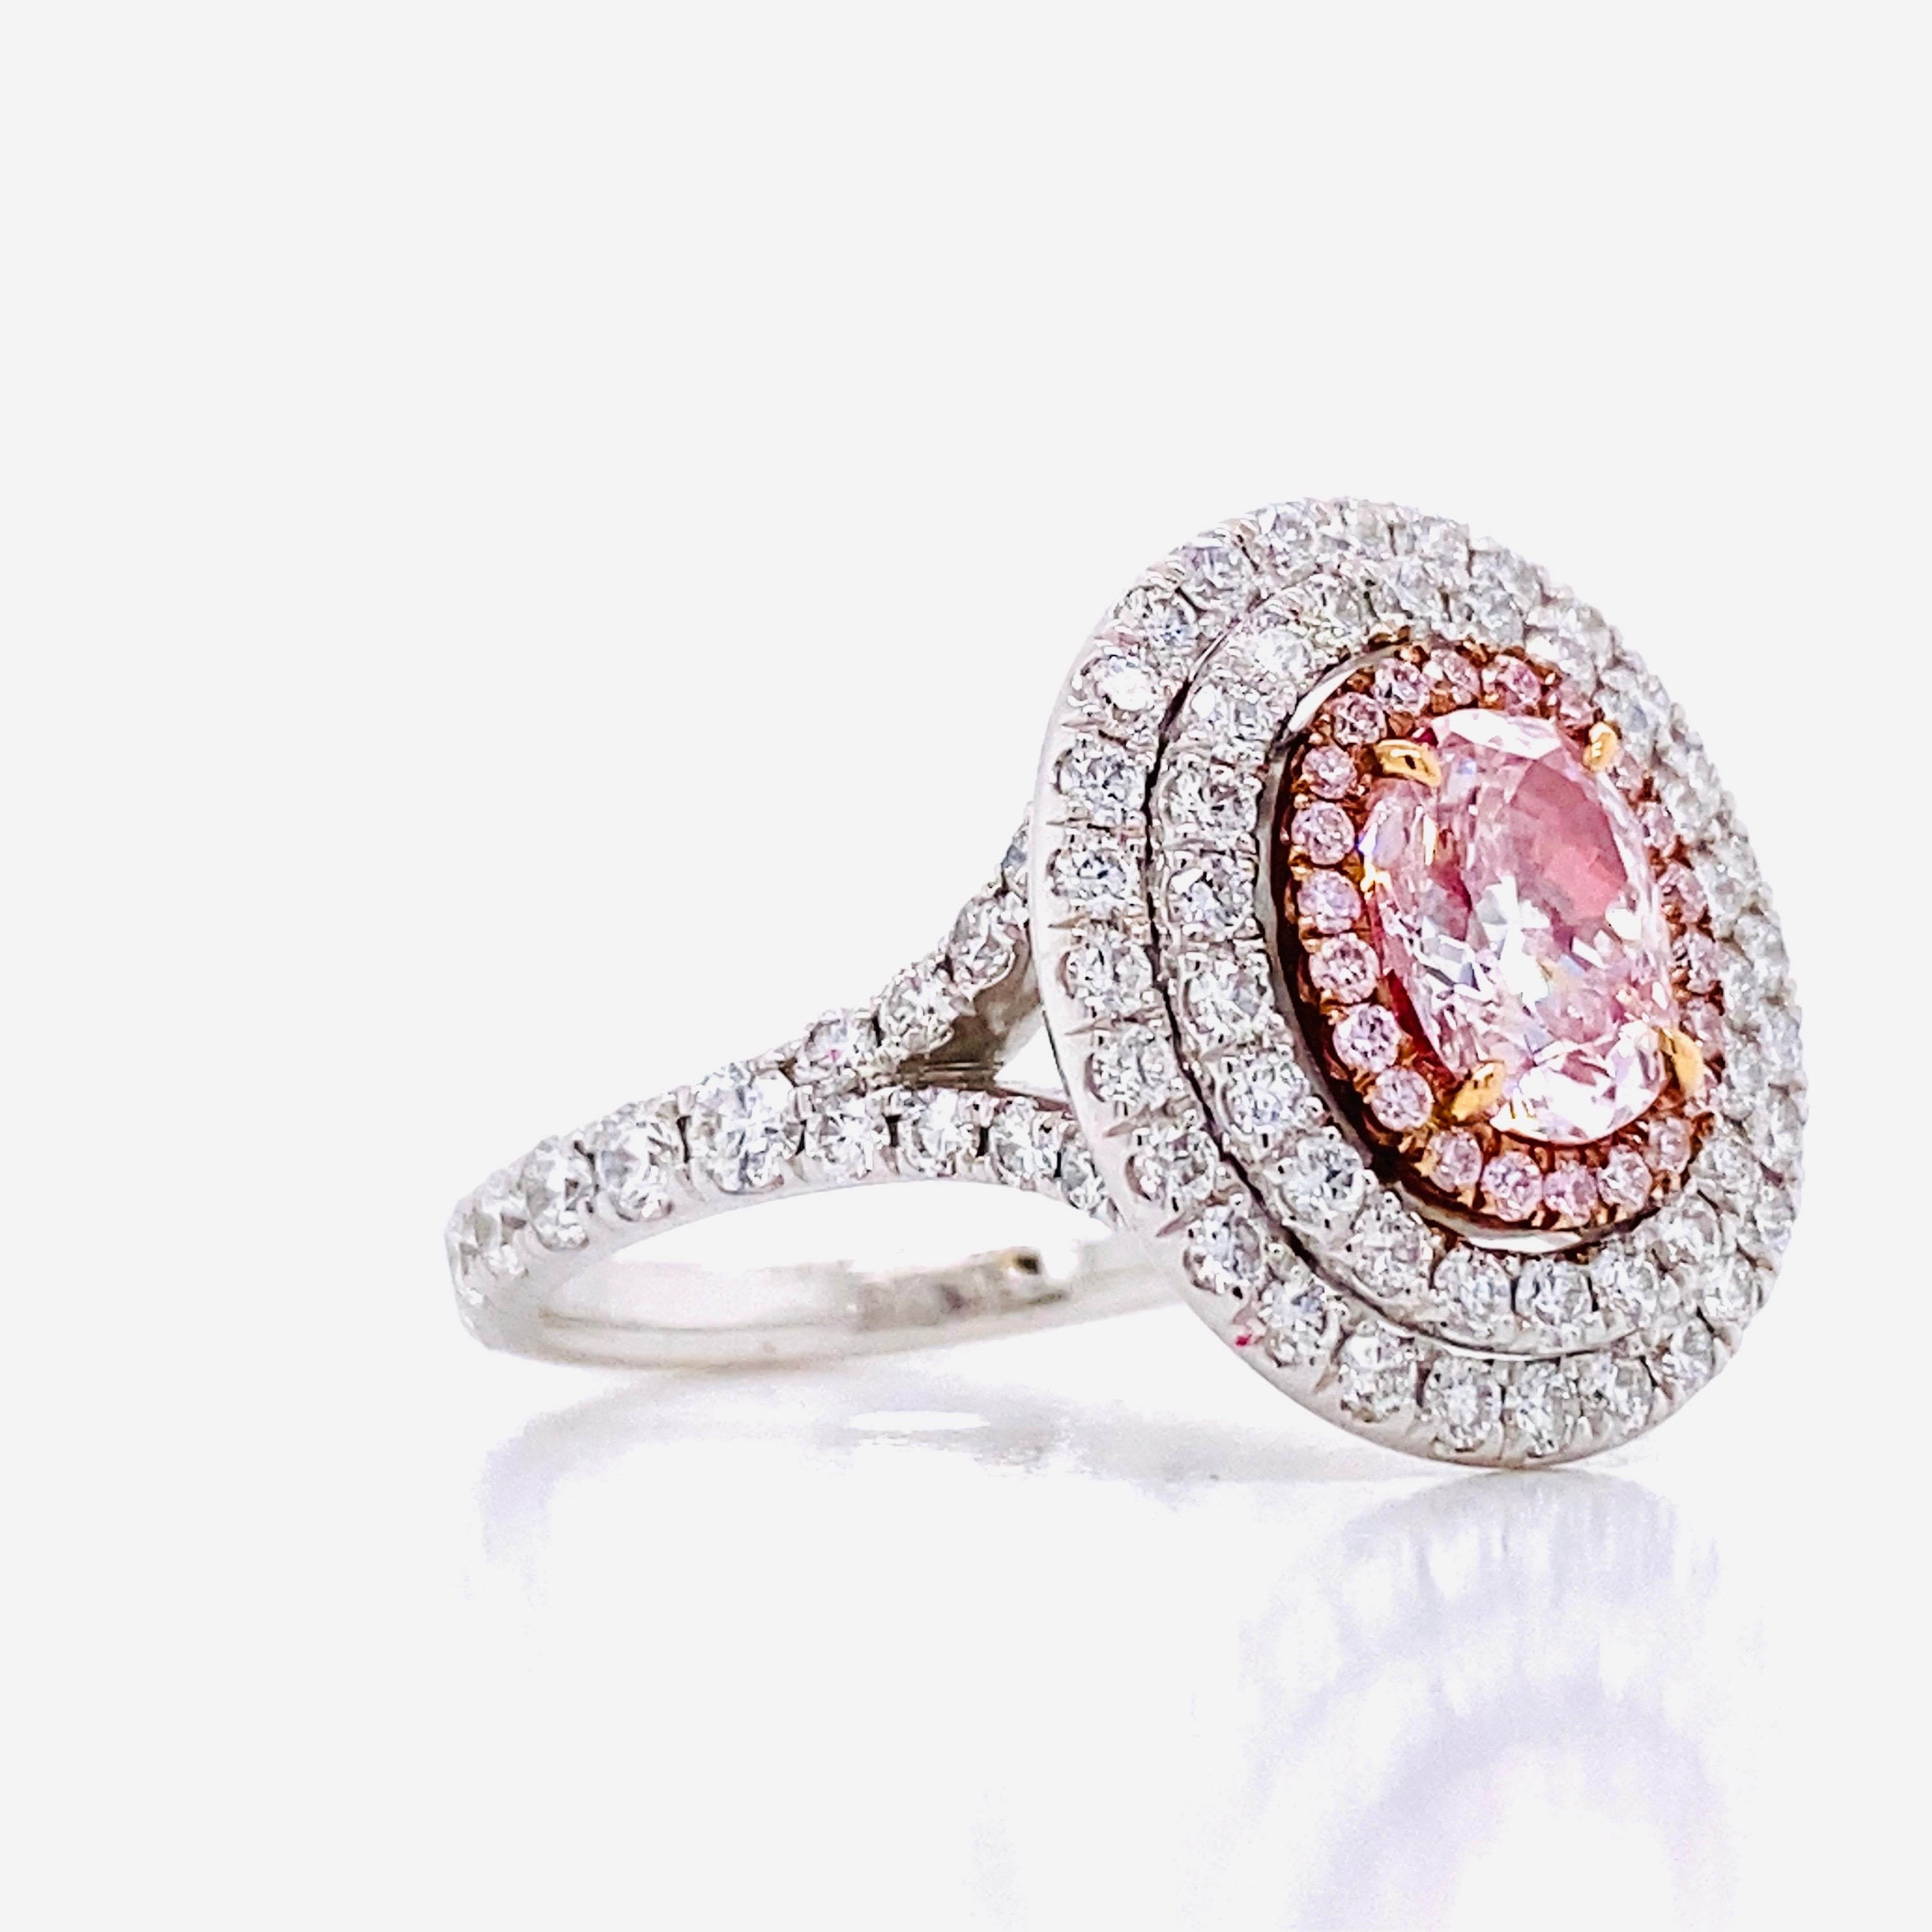 Oval Cut Emilio Jewelry GIA Certified 1.00 Carat Fancy Light Pure Pink Diamond Ring For Sale